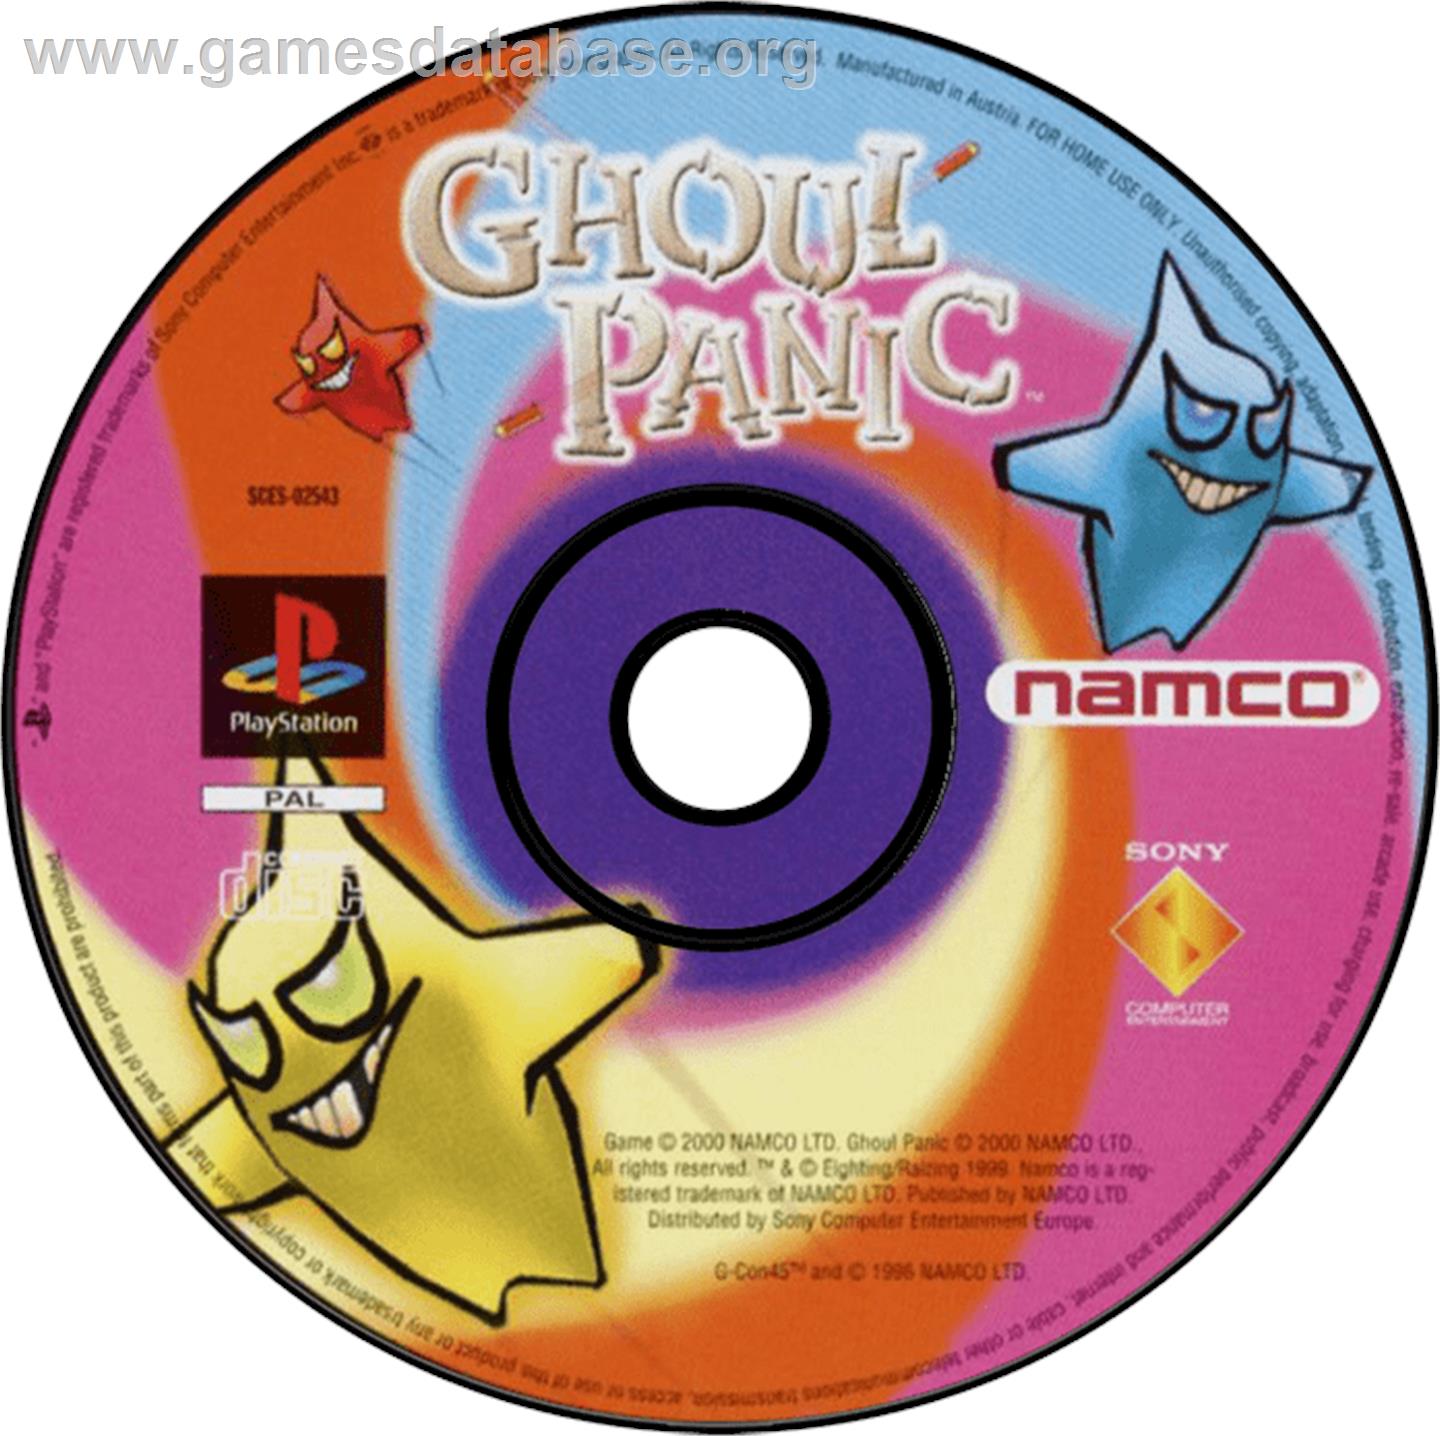 Ghoul Panic - Sony Playstation - Artwork - Disc